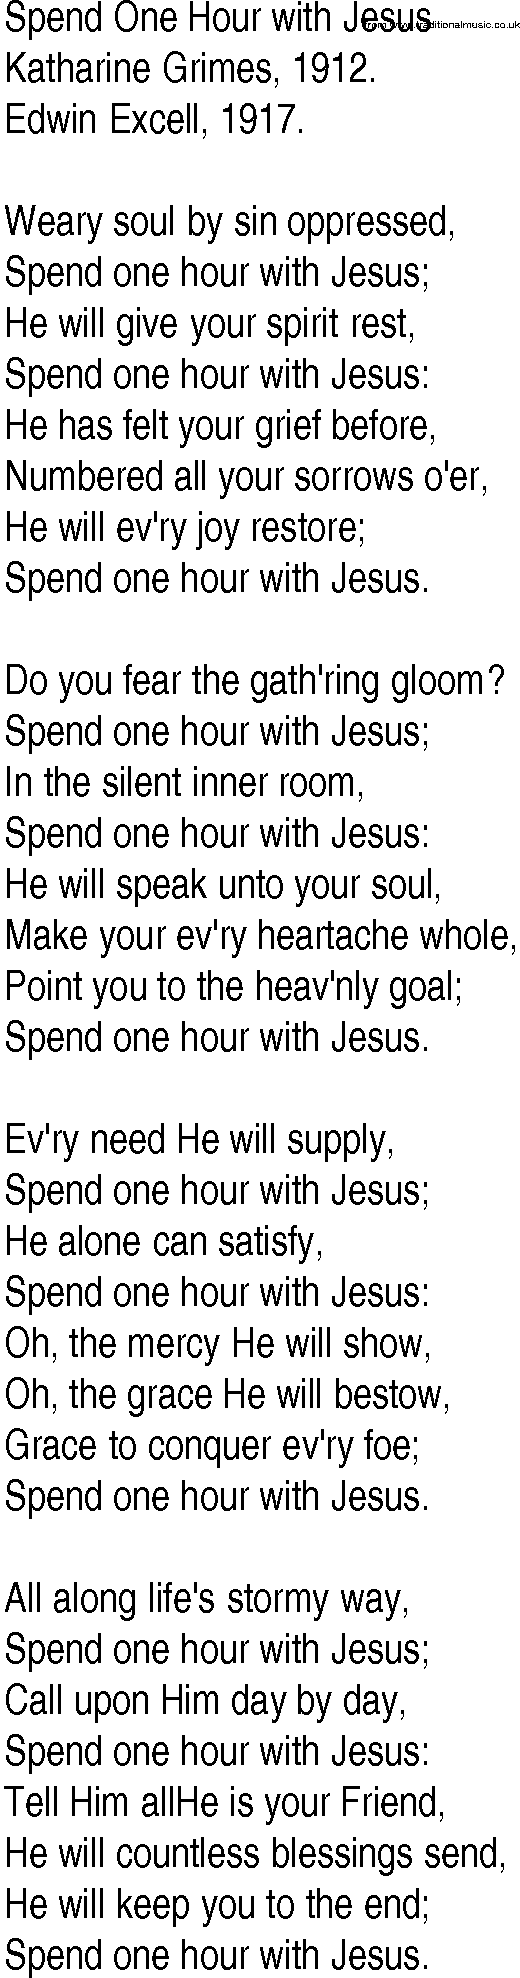 Hymn and Gospel Song: Spend One Hour with Jesus by Katharine Grimes lyrics